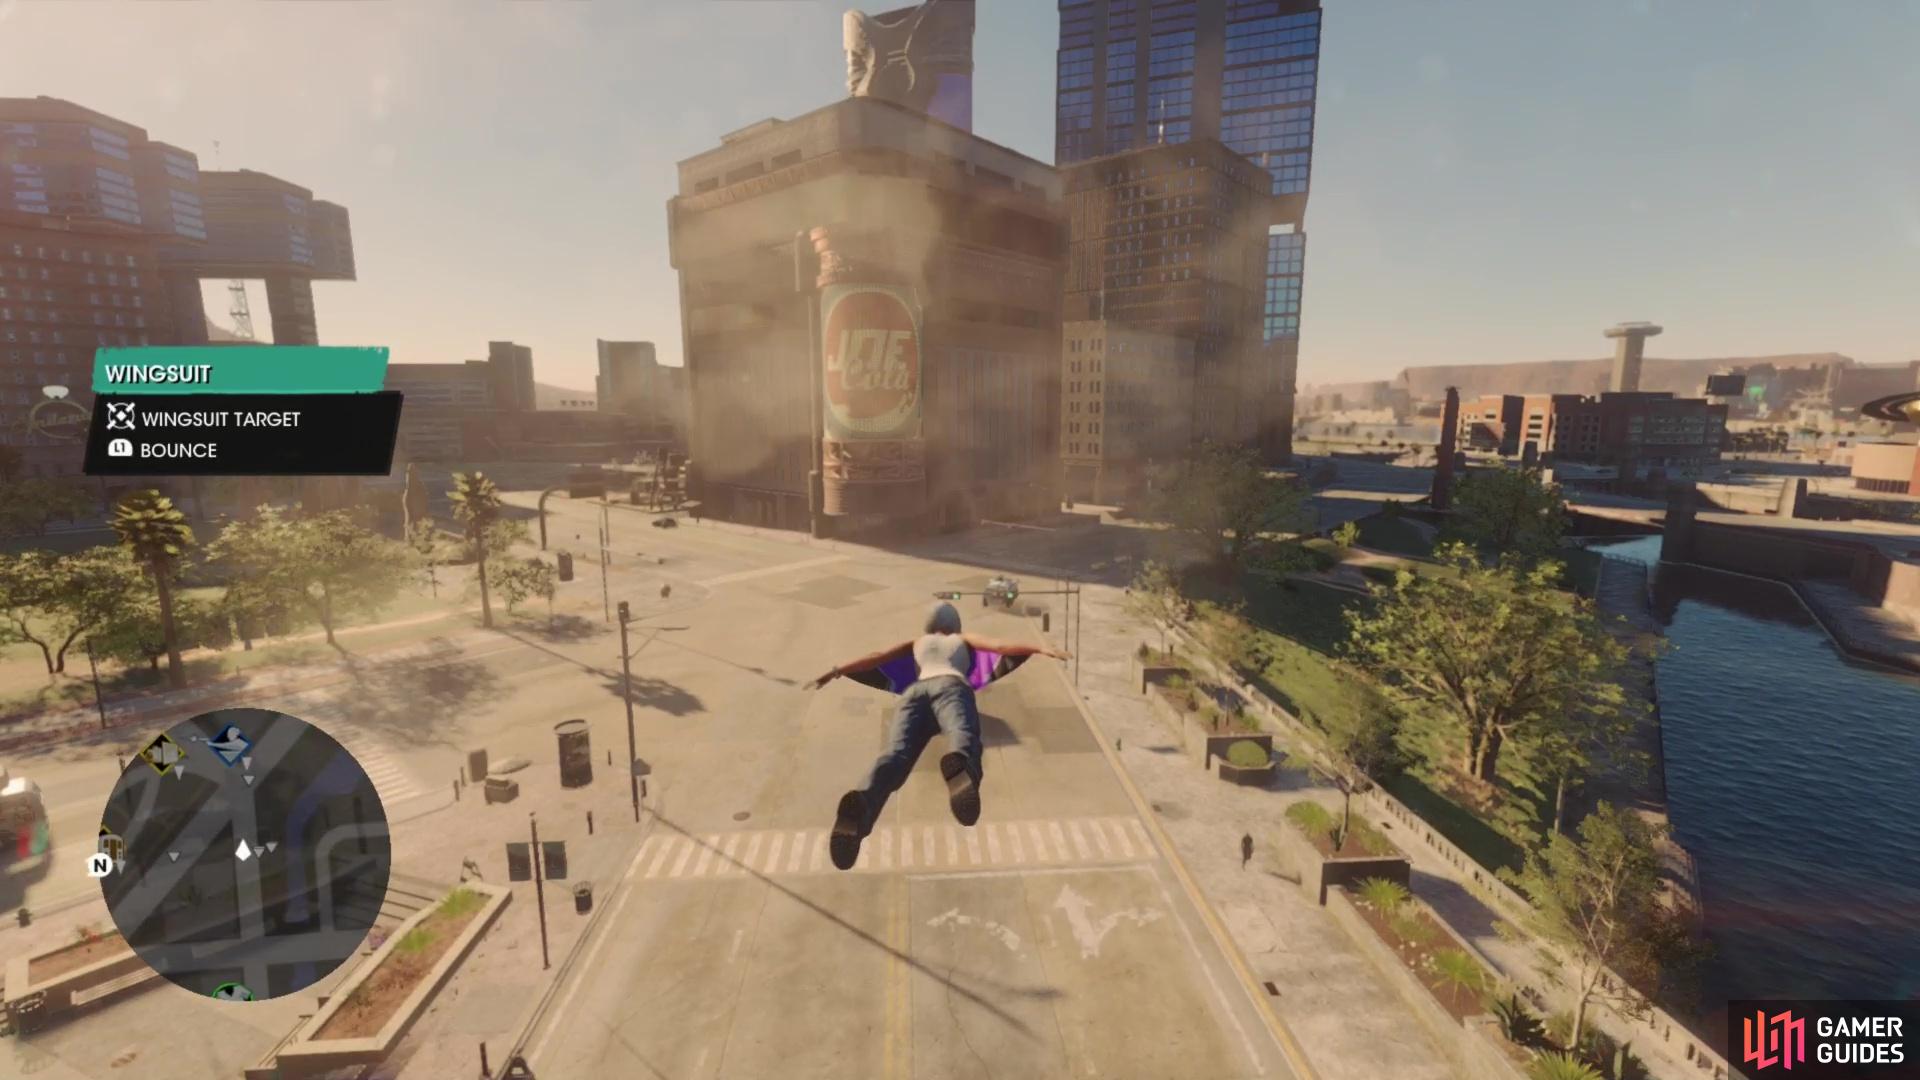 You can use the Wingsuit to break your fall and to glide.